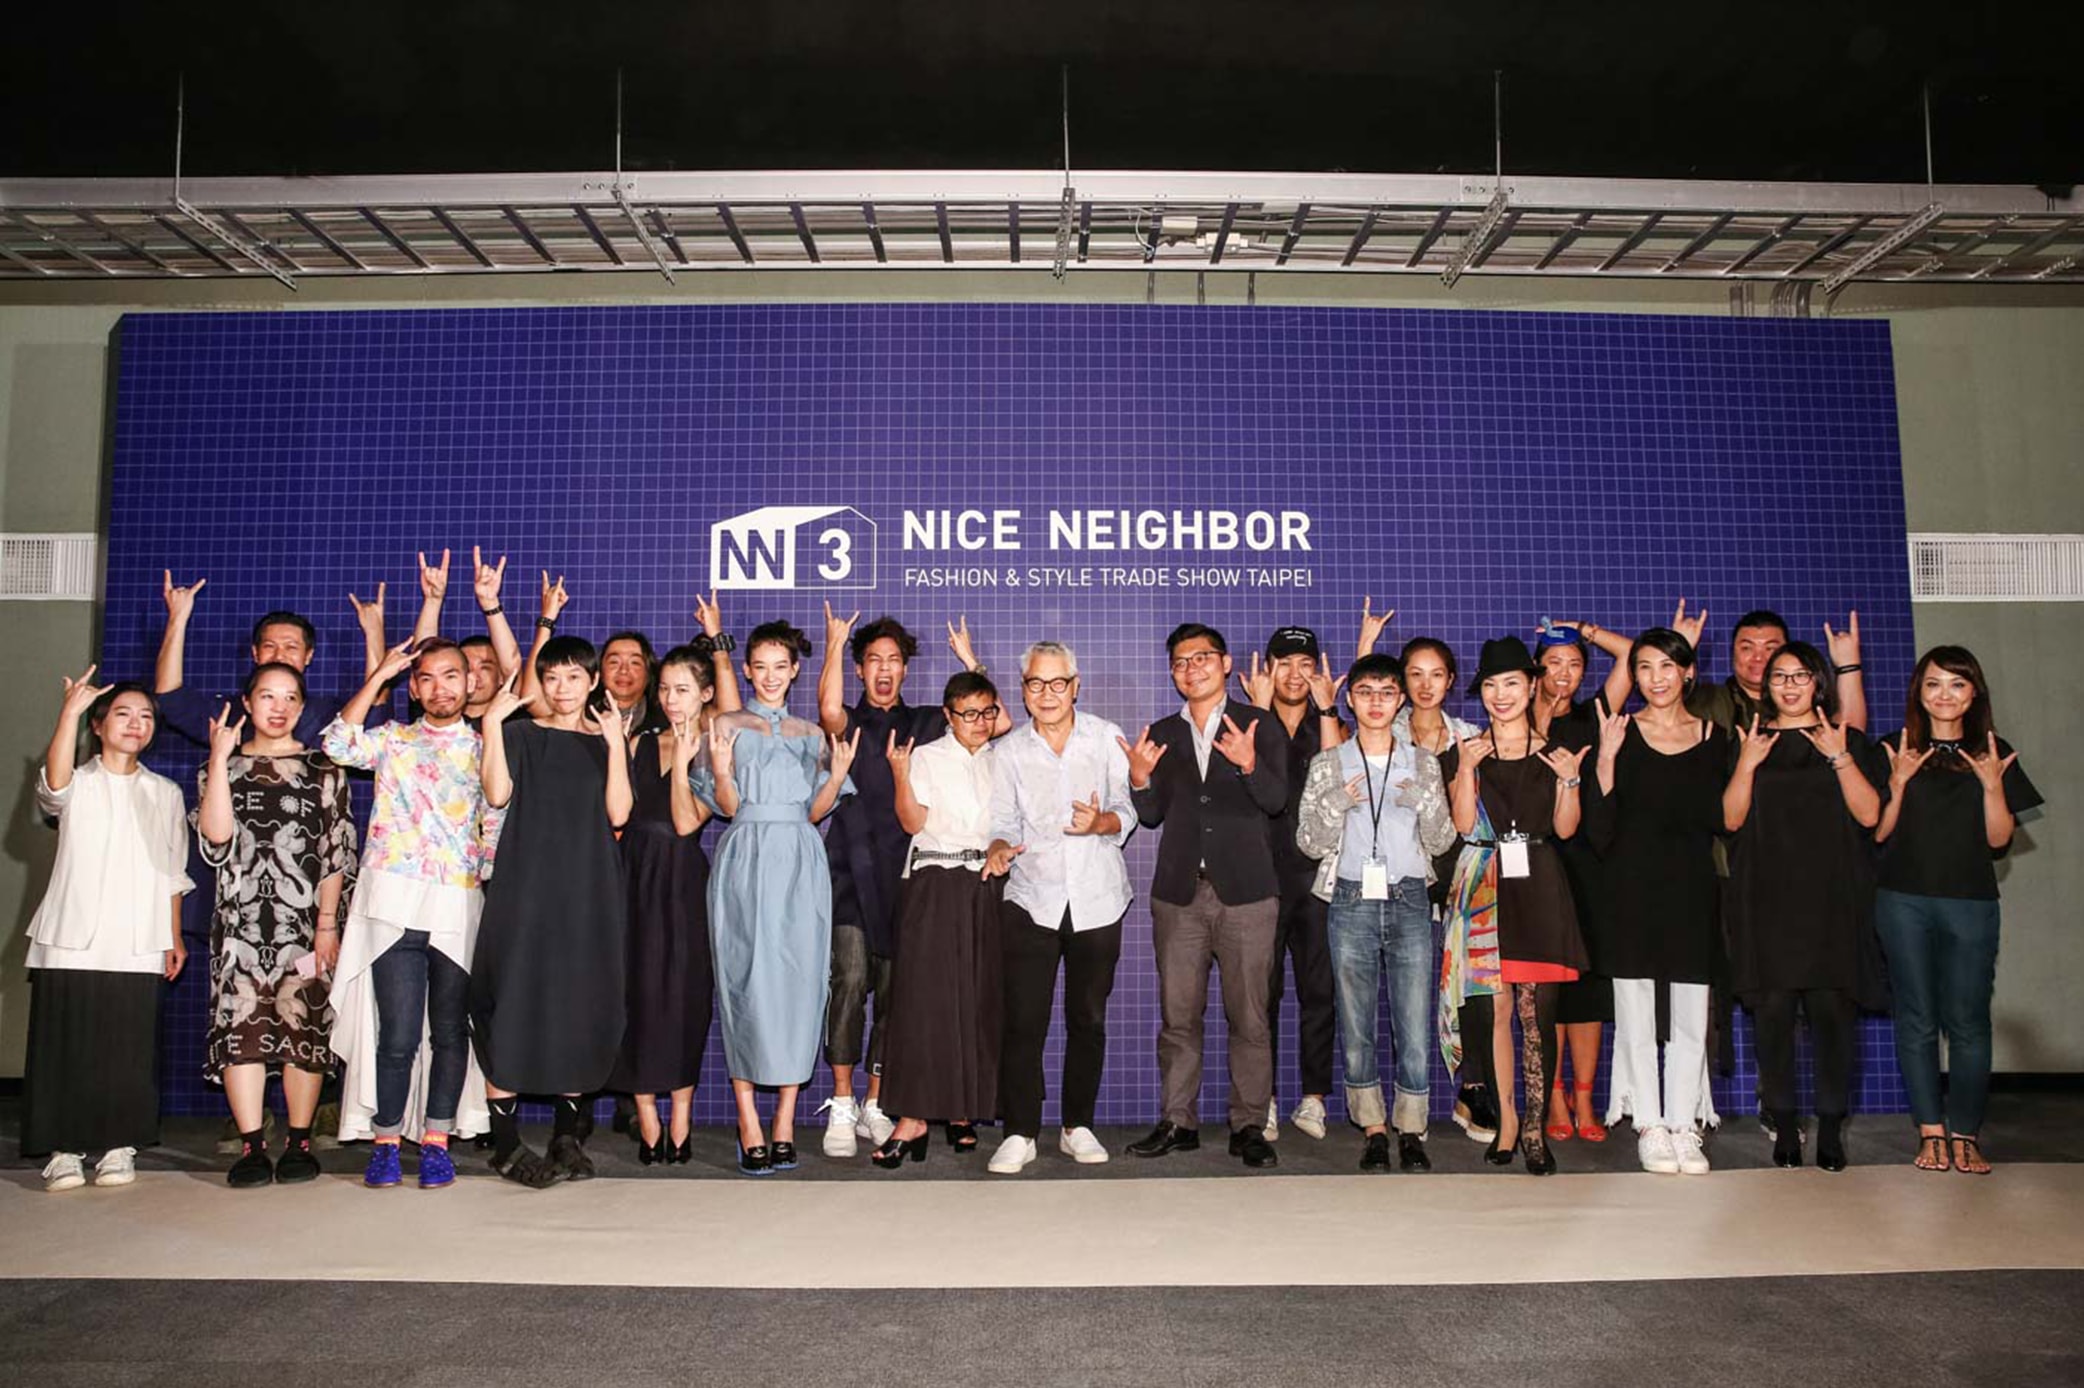 NICE NEIGHBOR the tradeshow includes Taiwanese and Japanese designers and influencers’ viewpoints and participation